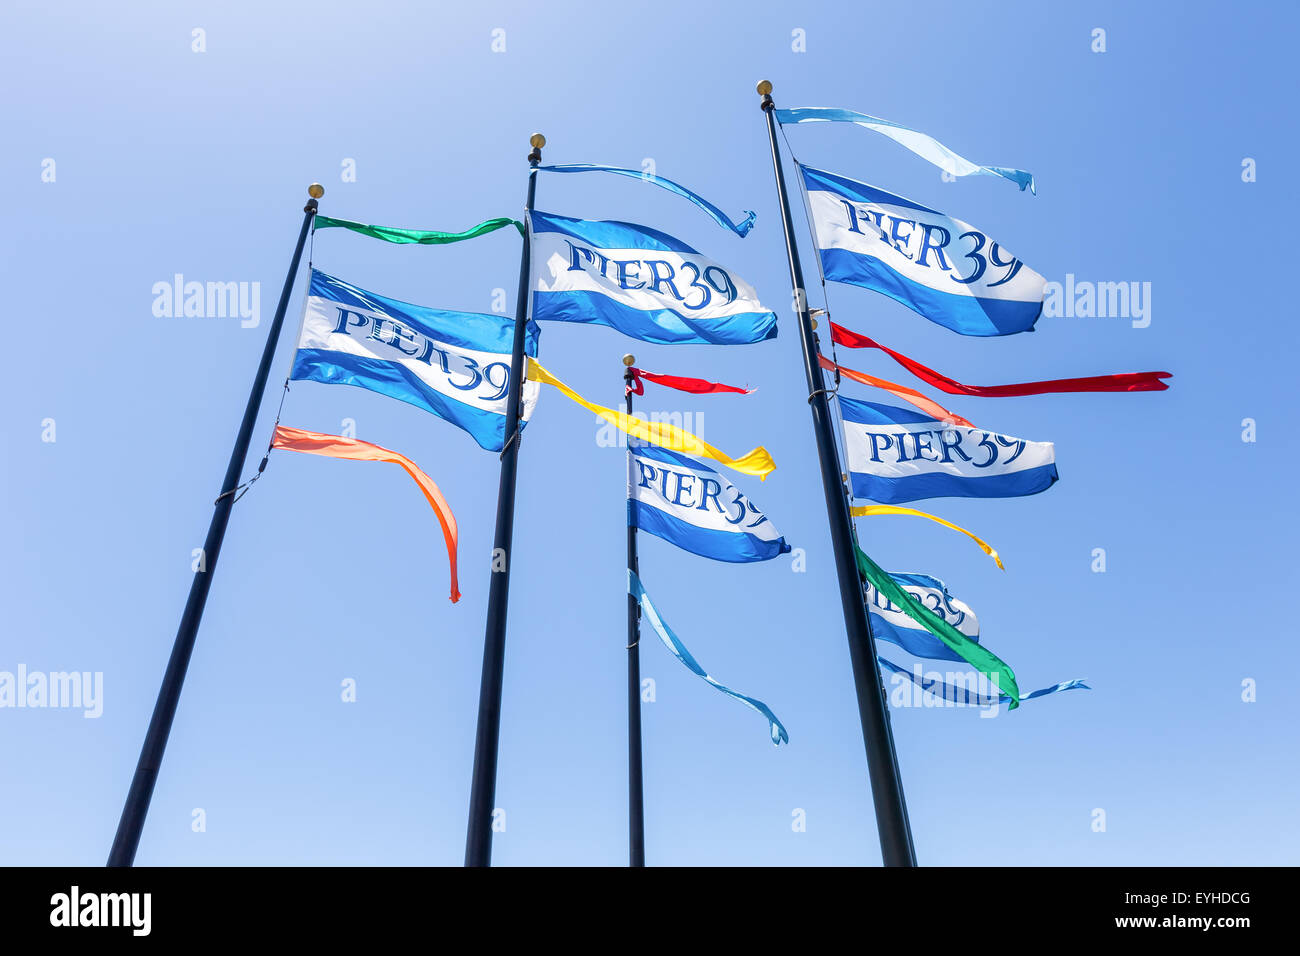 Flags of Pier 39 in San Francisco, California, United States, North America Stock Photo